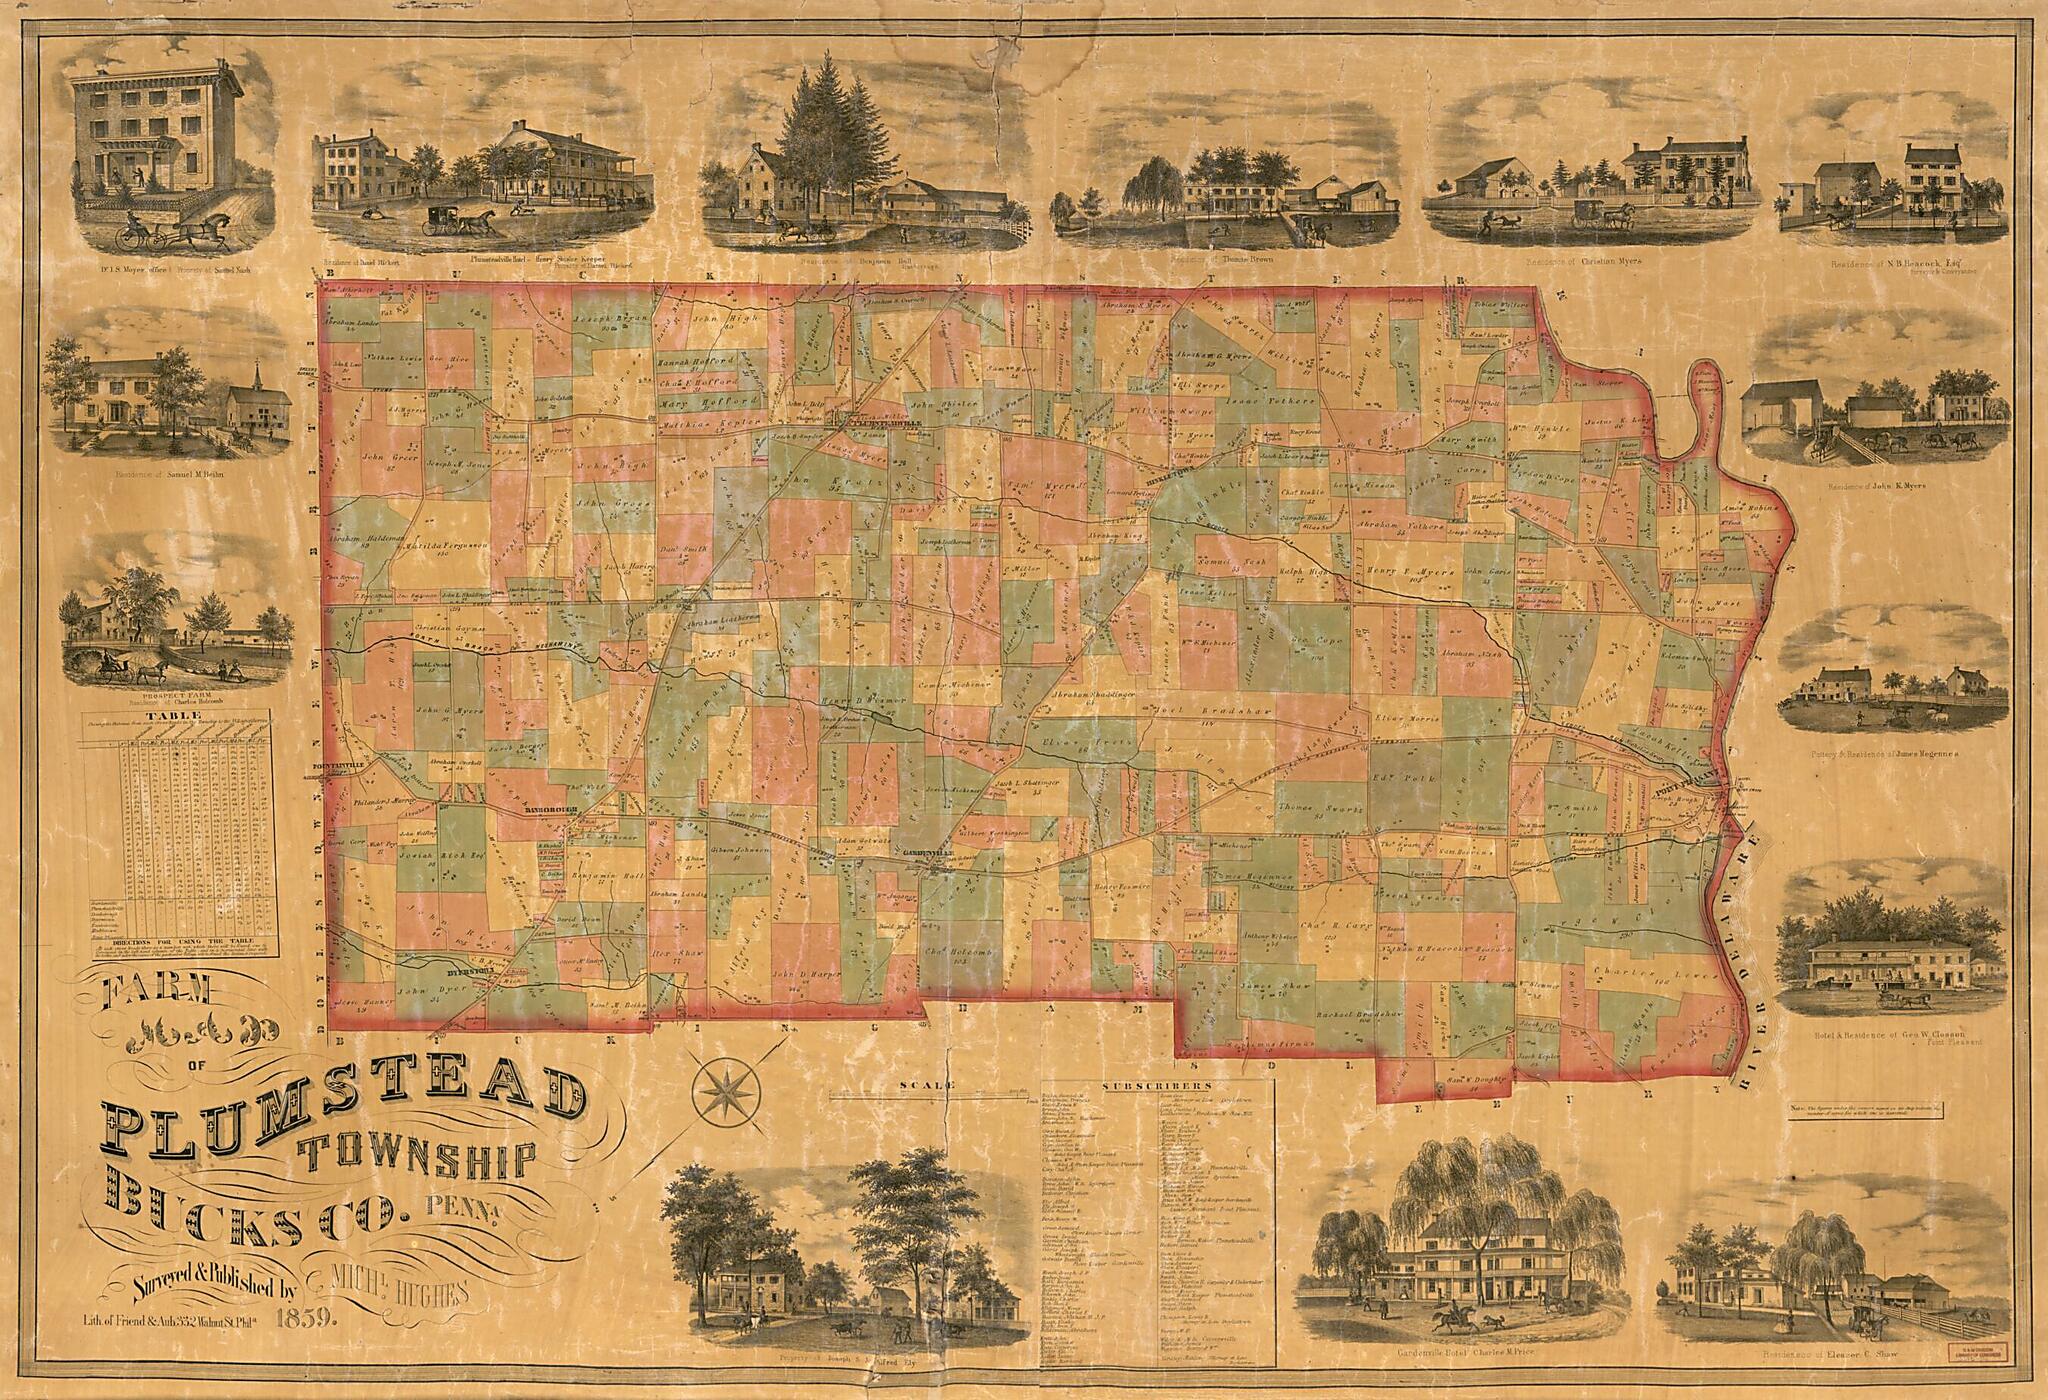 This old map of Farm Map of Plumstead Township, Bucks County, Penn&